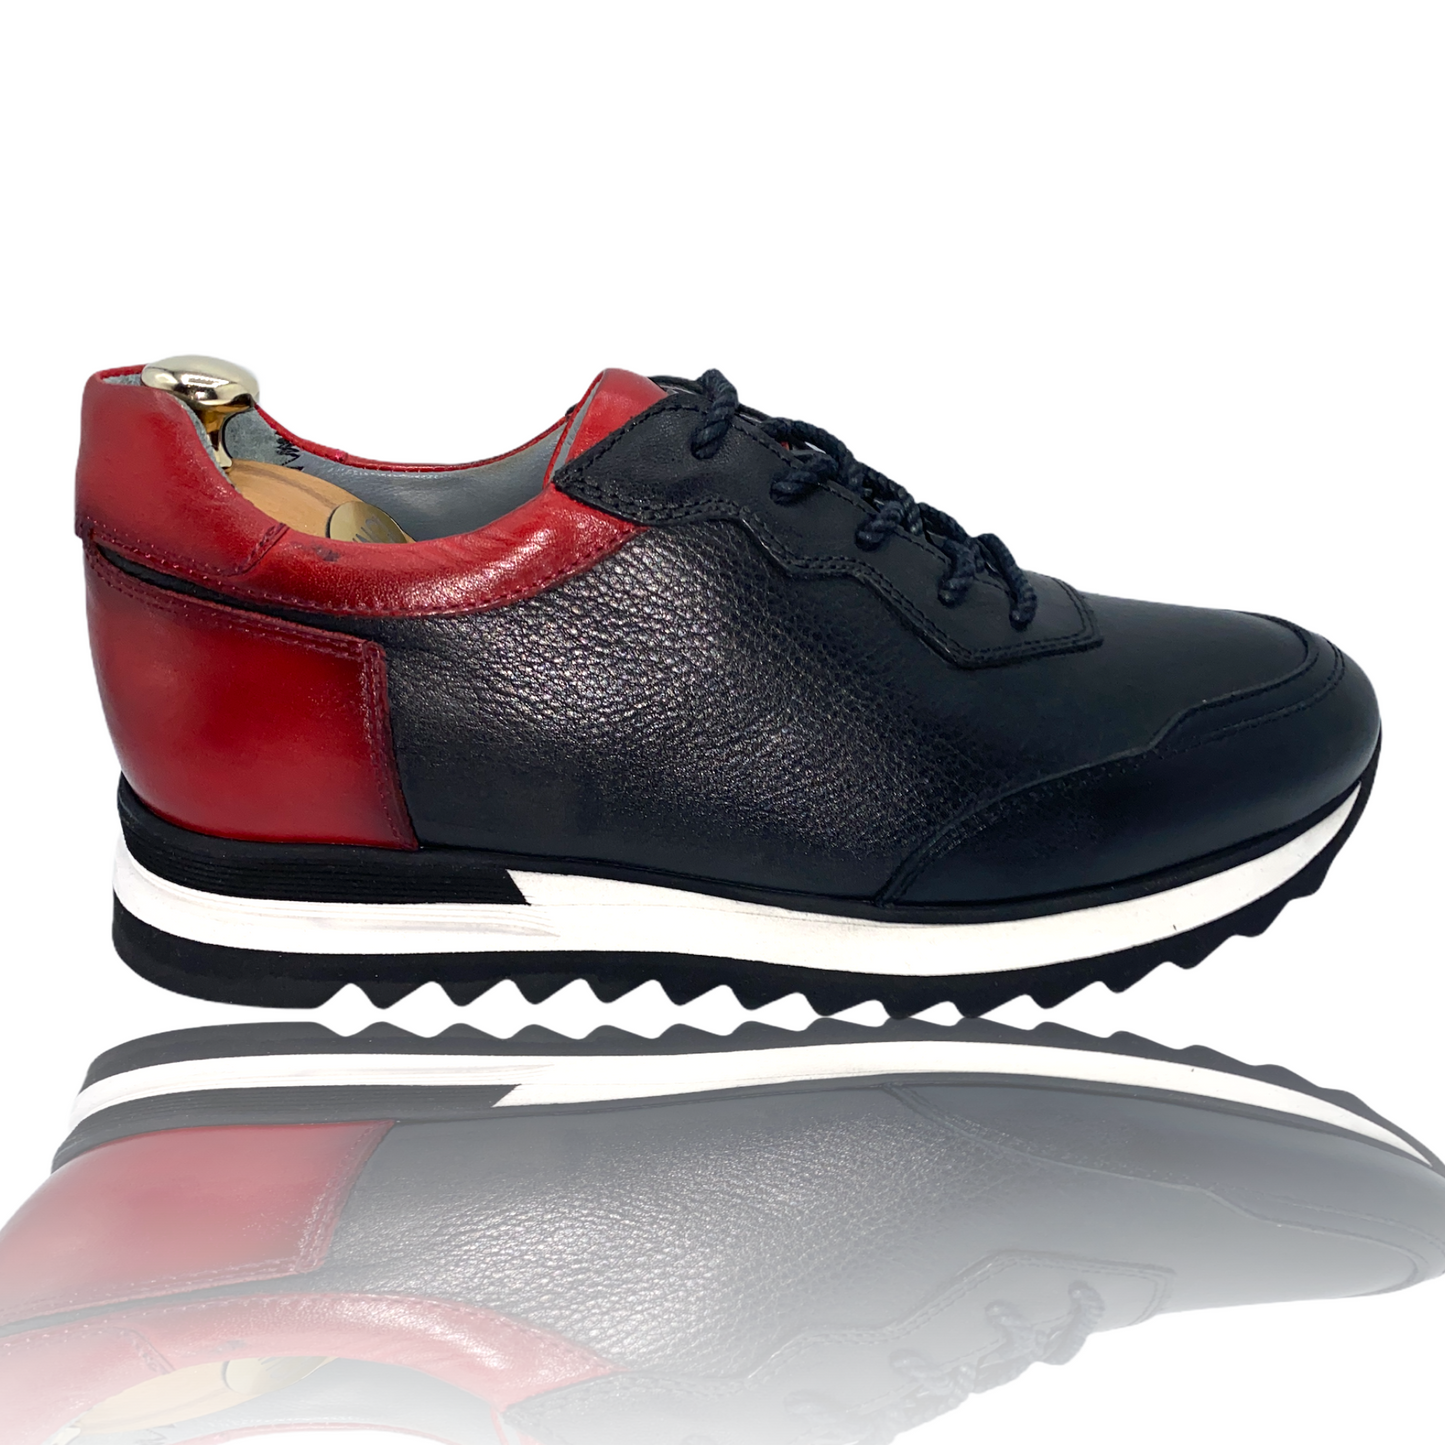 The Florida Black Leather Sneaker Final Sale!